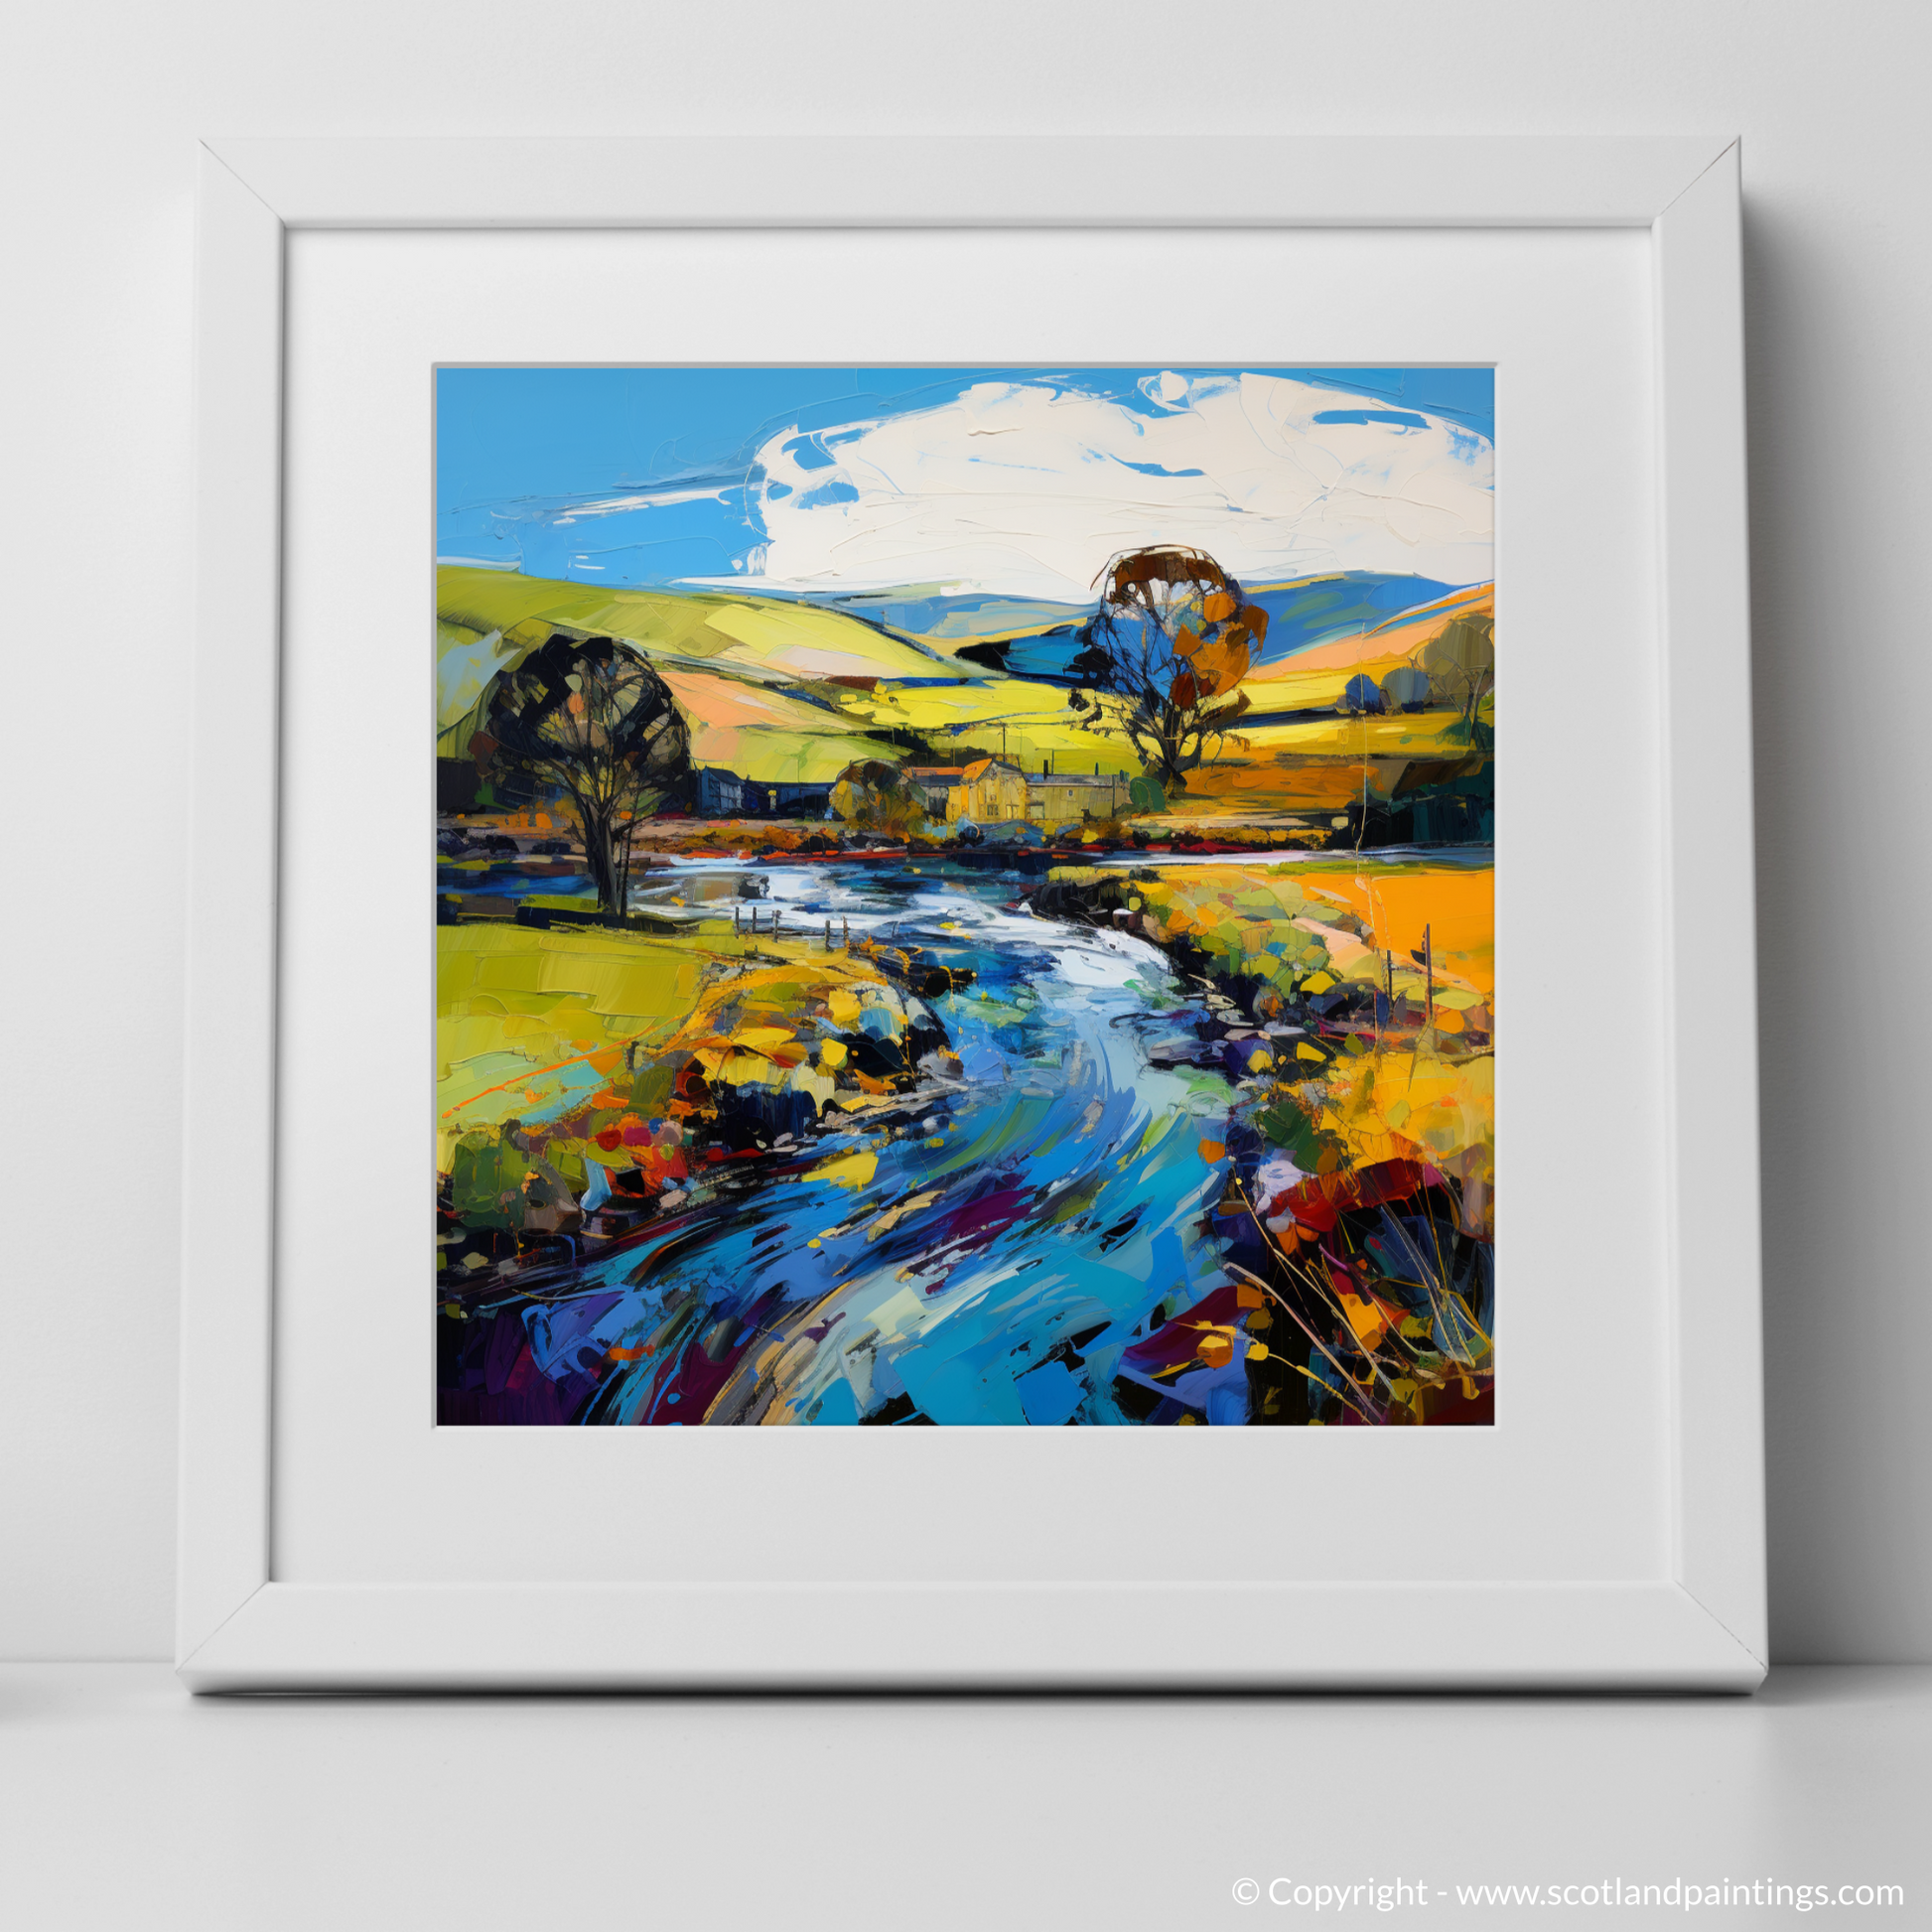 Art Print of River Deveron, Aberdeenshire with a white frame